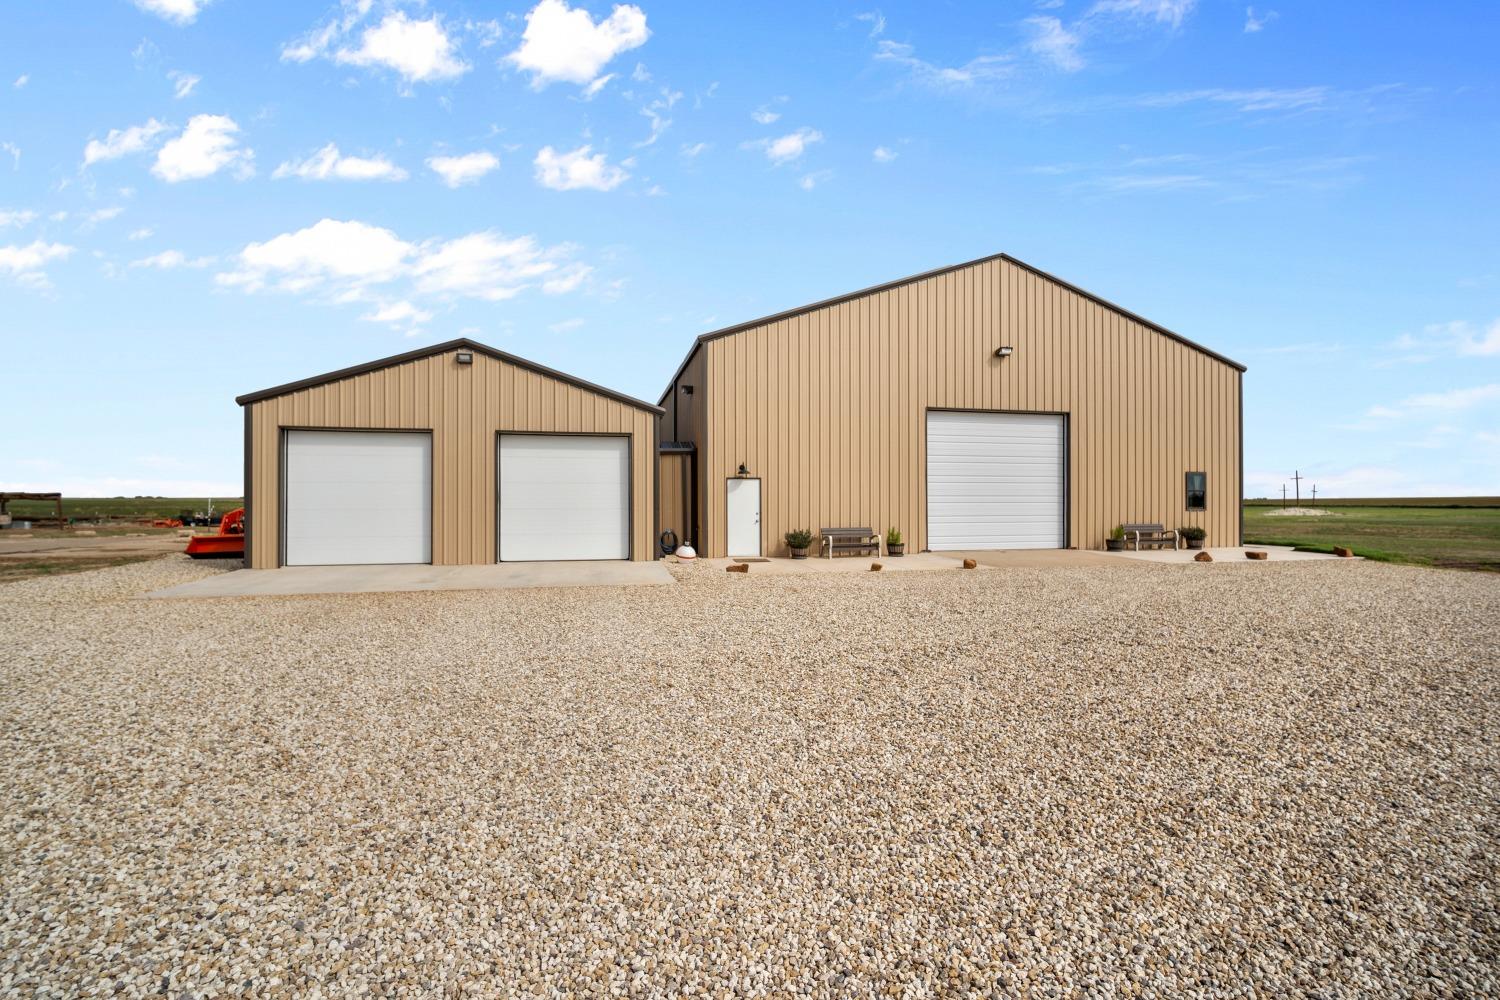 84 acres in the prestigious New Home School District on FM 211 with endless possibilities!!! The property currently has a 4,800 sq ft metal building (60 x80) plus a 30x50 garage. Both are heated and insulated. Living space blends a travel trailer with four additional rooms built by Trey Strong totaling 2 bedrooms, 2 full baths, 2 living rooms, and 2 offices: all are heated and air conditioned, with an adjacent laundry room. Outdoor space includes two pergolas, large gardens, and endless views. In addition, the property has 3 working water wells, high speed internet, and natural gas, plus a Generac Generator for back-up power. Options abound for residential development, farming or ranching, creating a venue, or building your dream house!